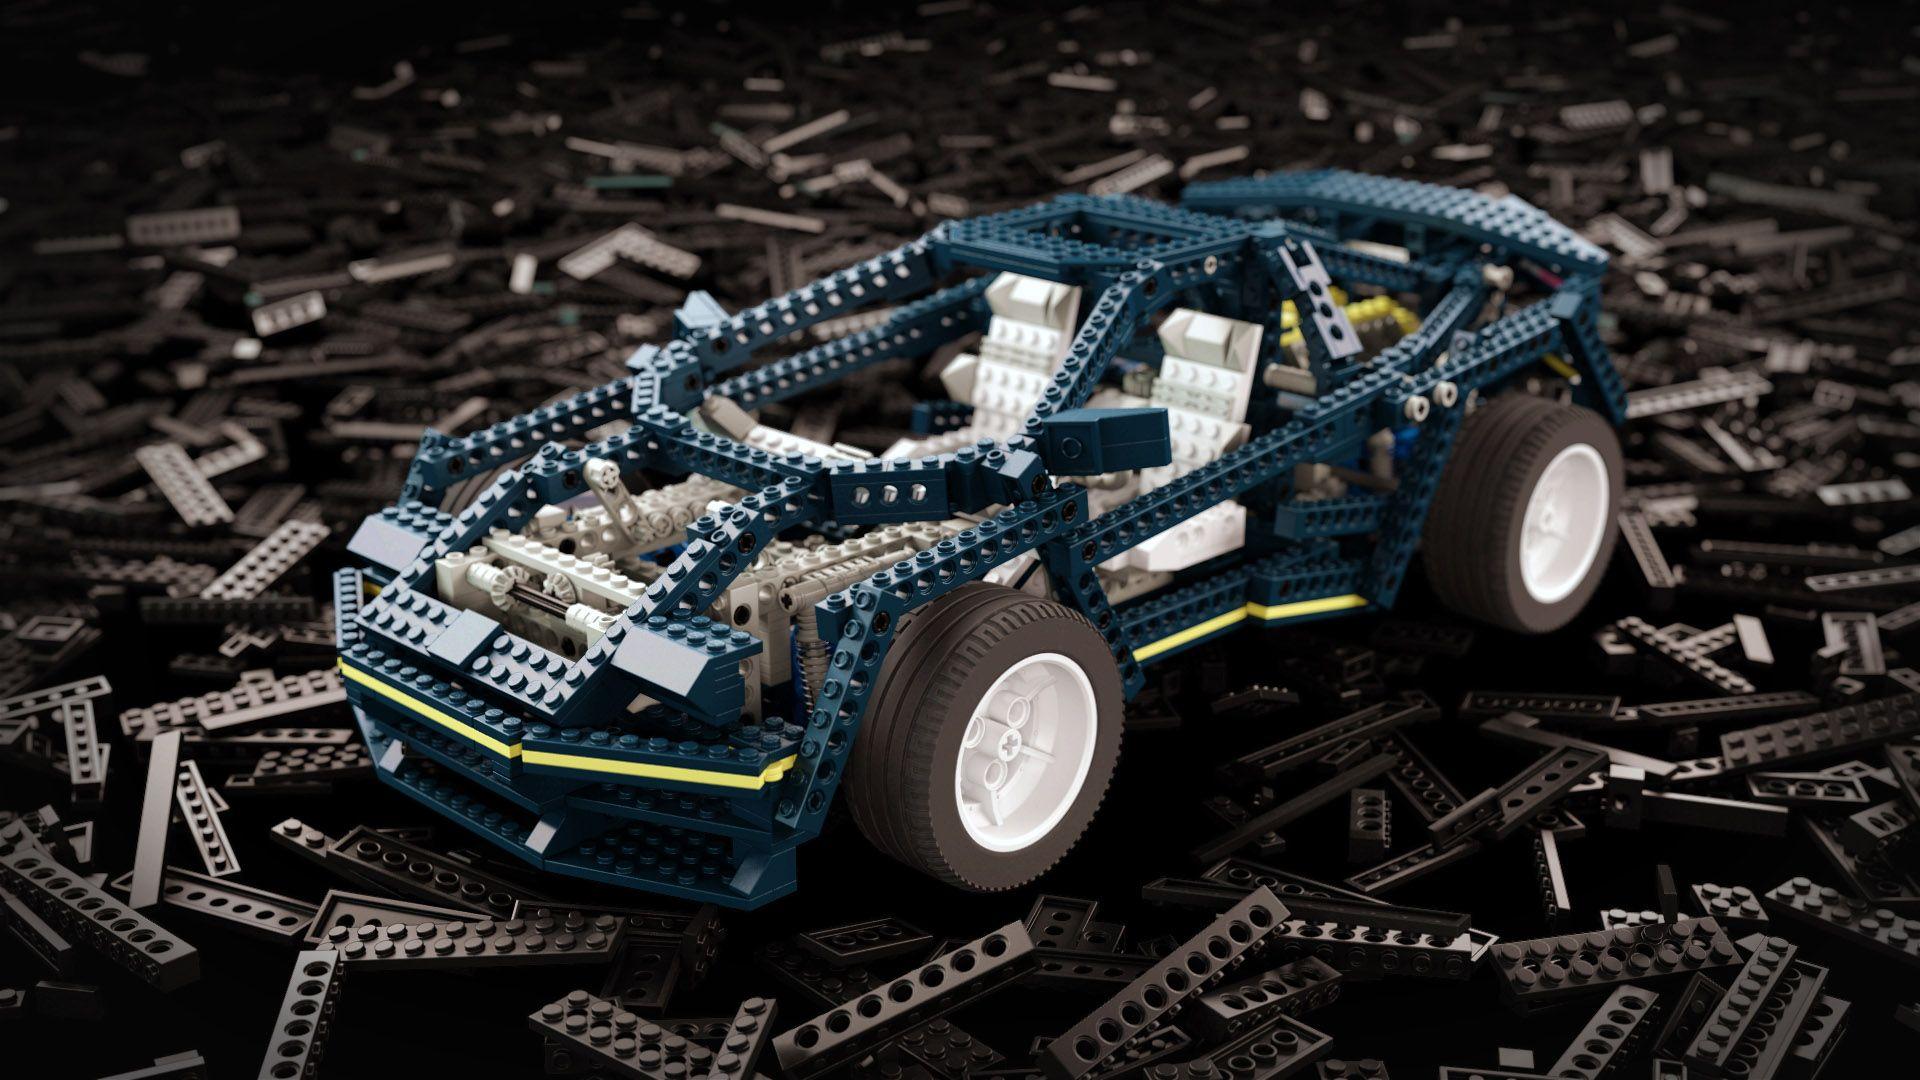 LEGO with 3Ds Max. CGI. Lego technic and 3Ds max